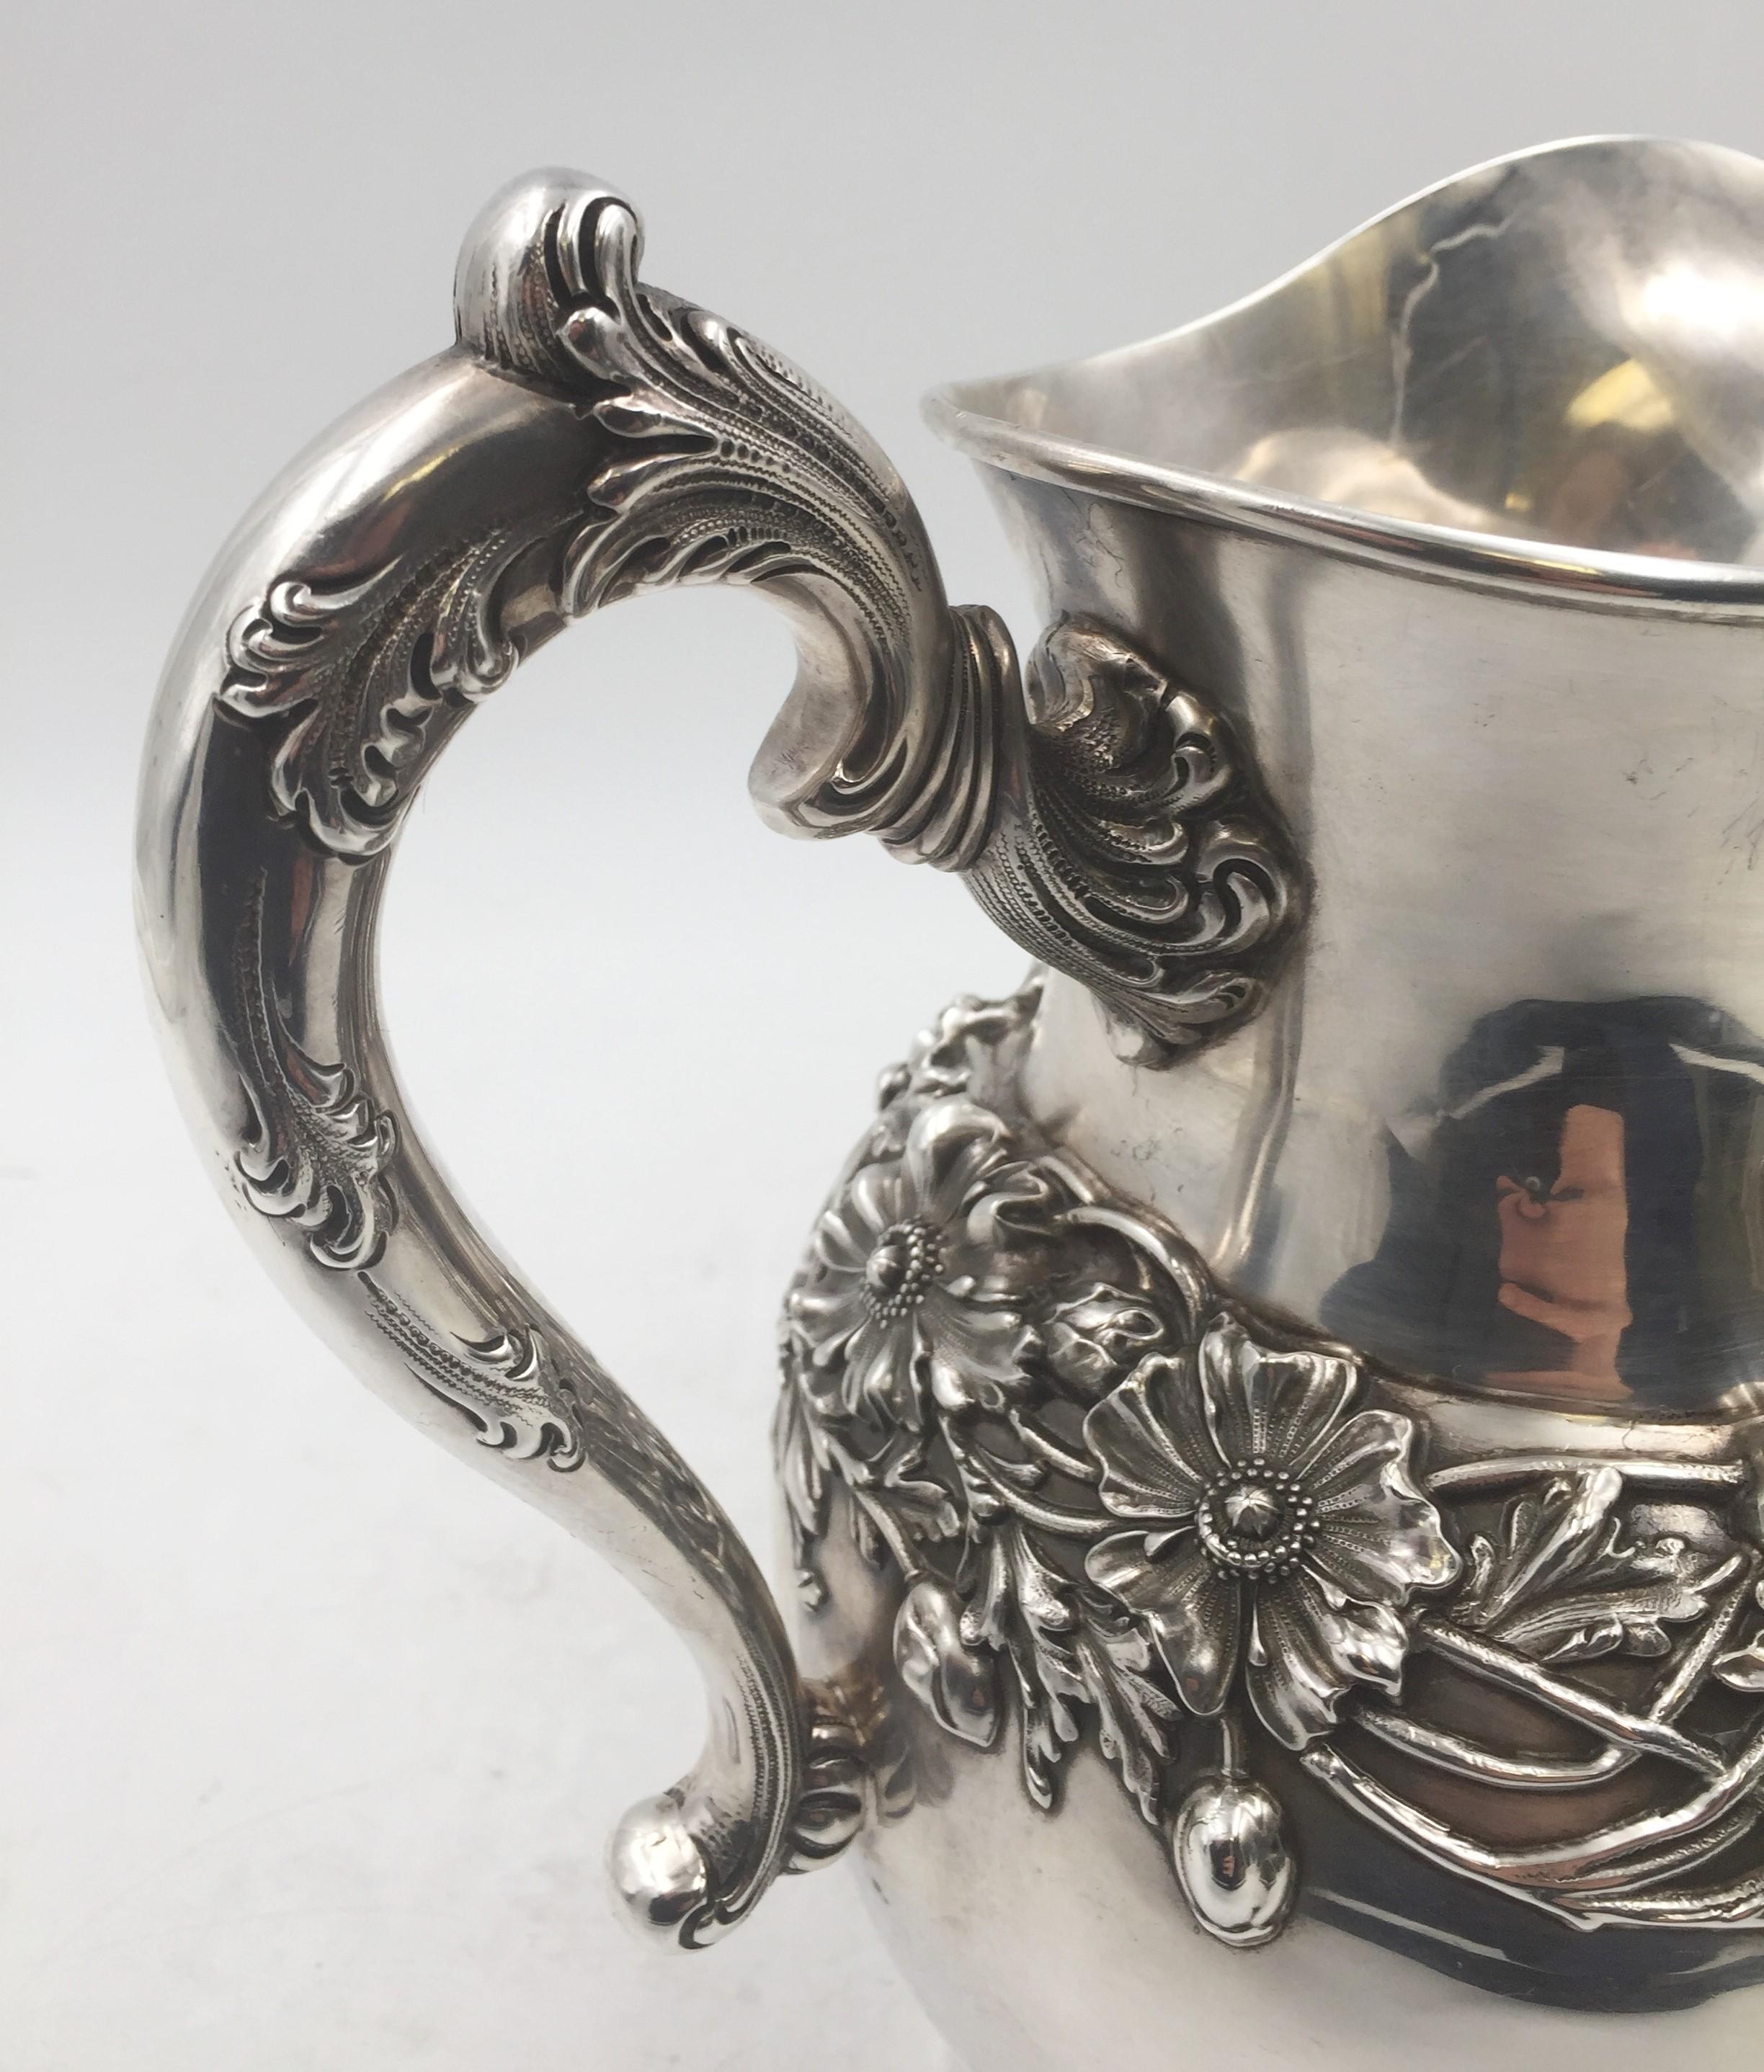 American J. E. Caldwell Sterling Silver Pitcher Jug in Art Nouveau Style with Flowers